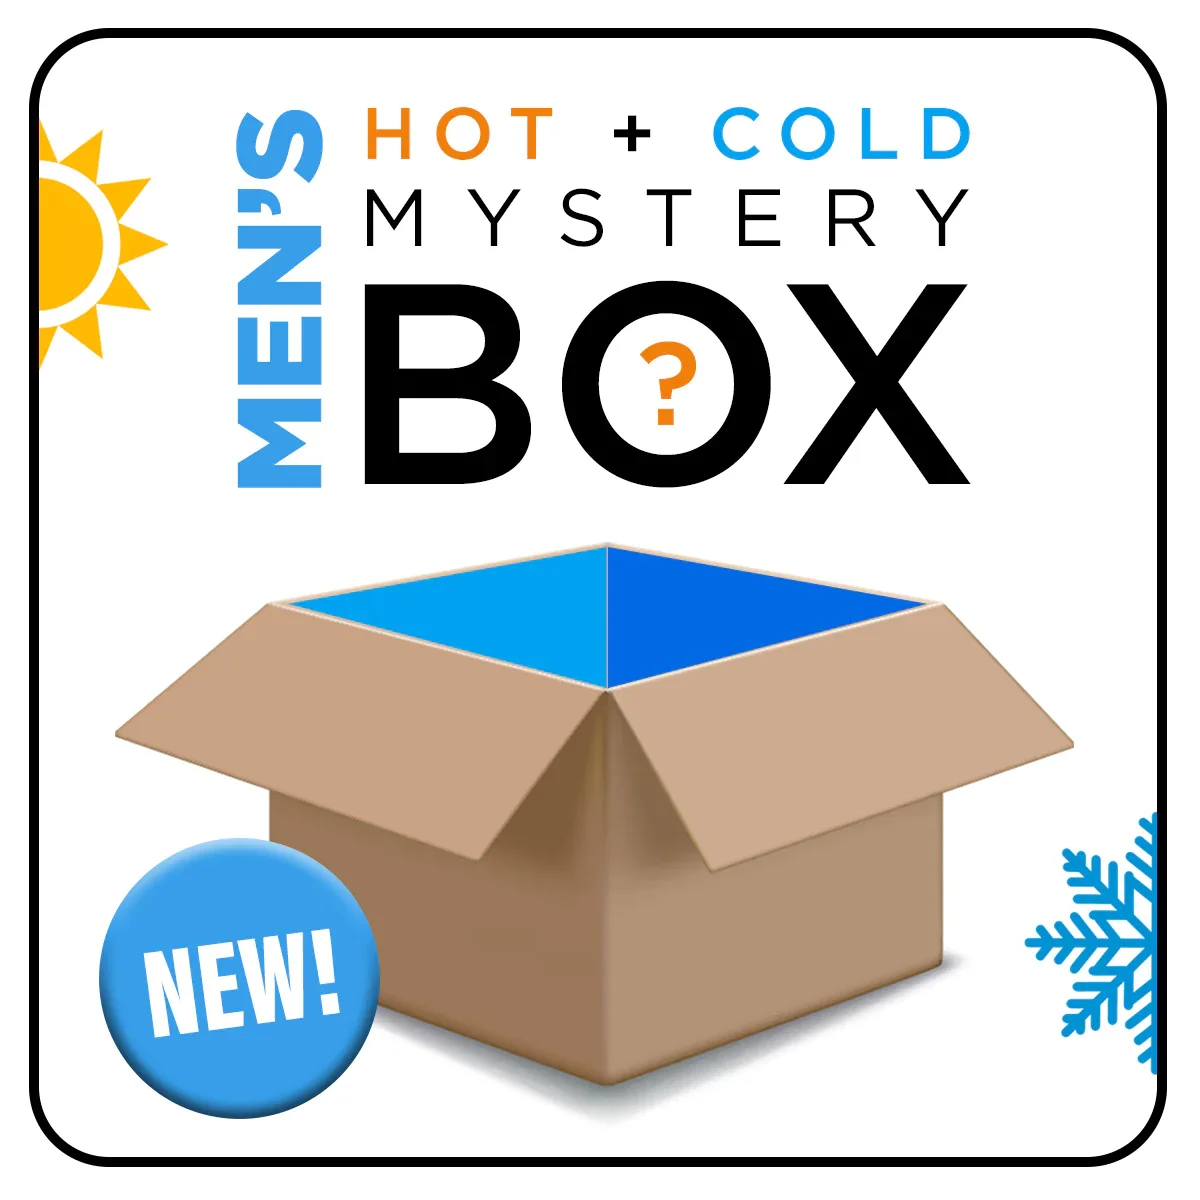 Image of Men's Mystery Box: Hot + Cold